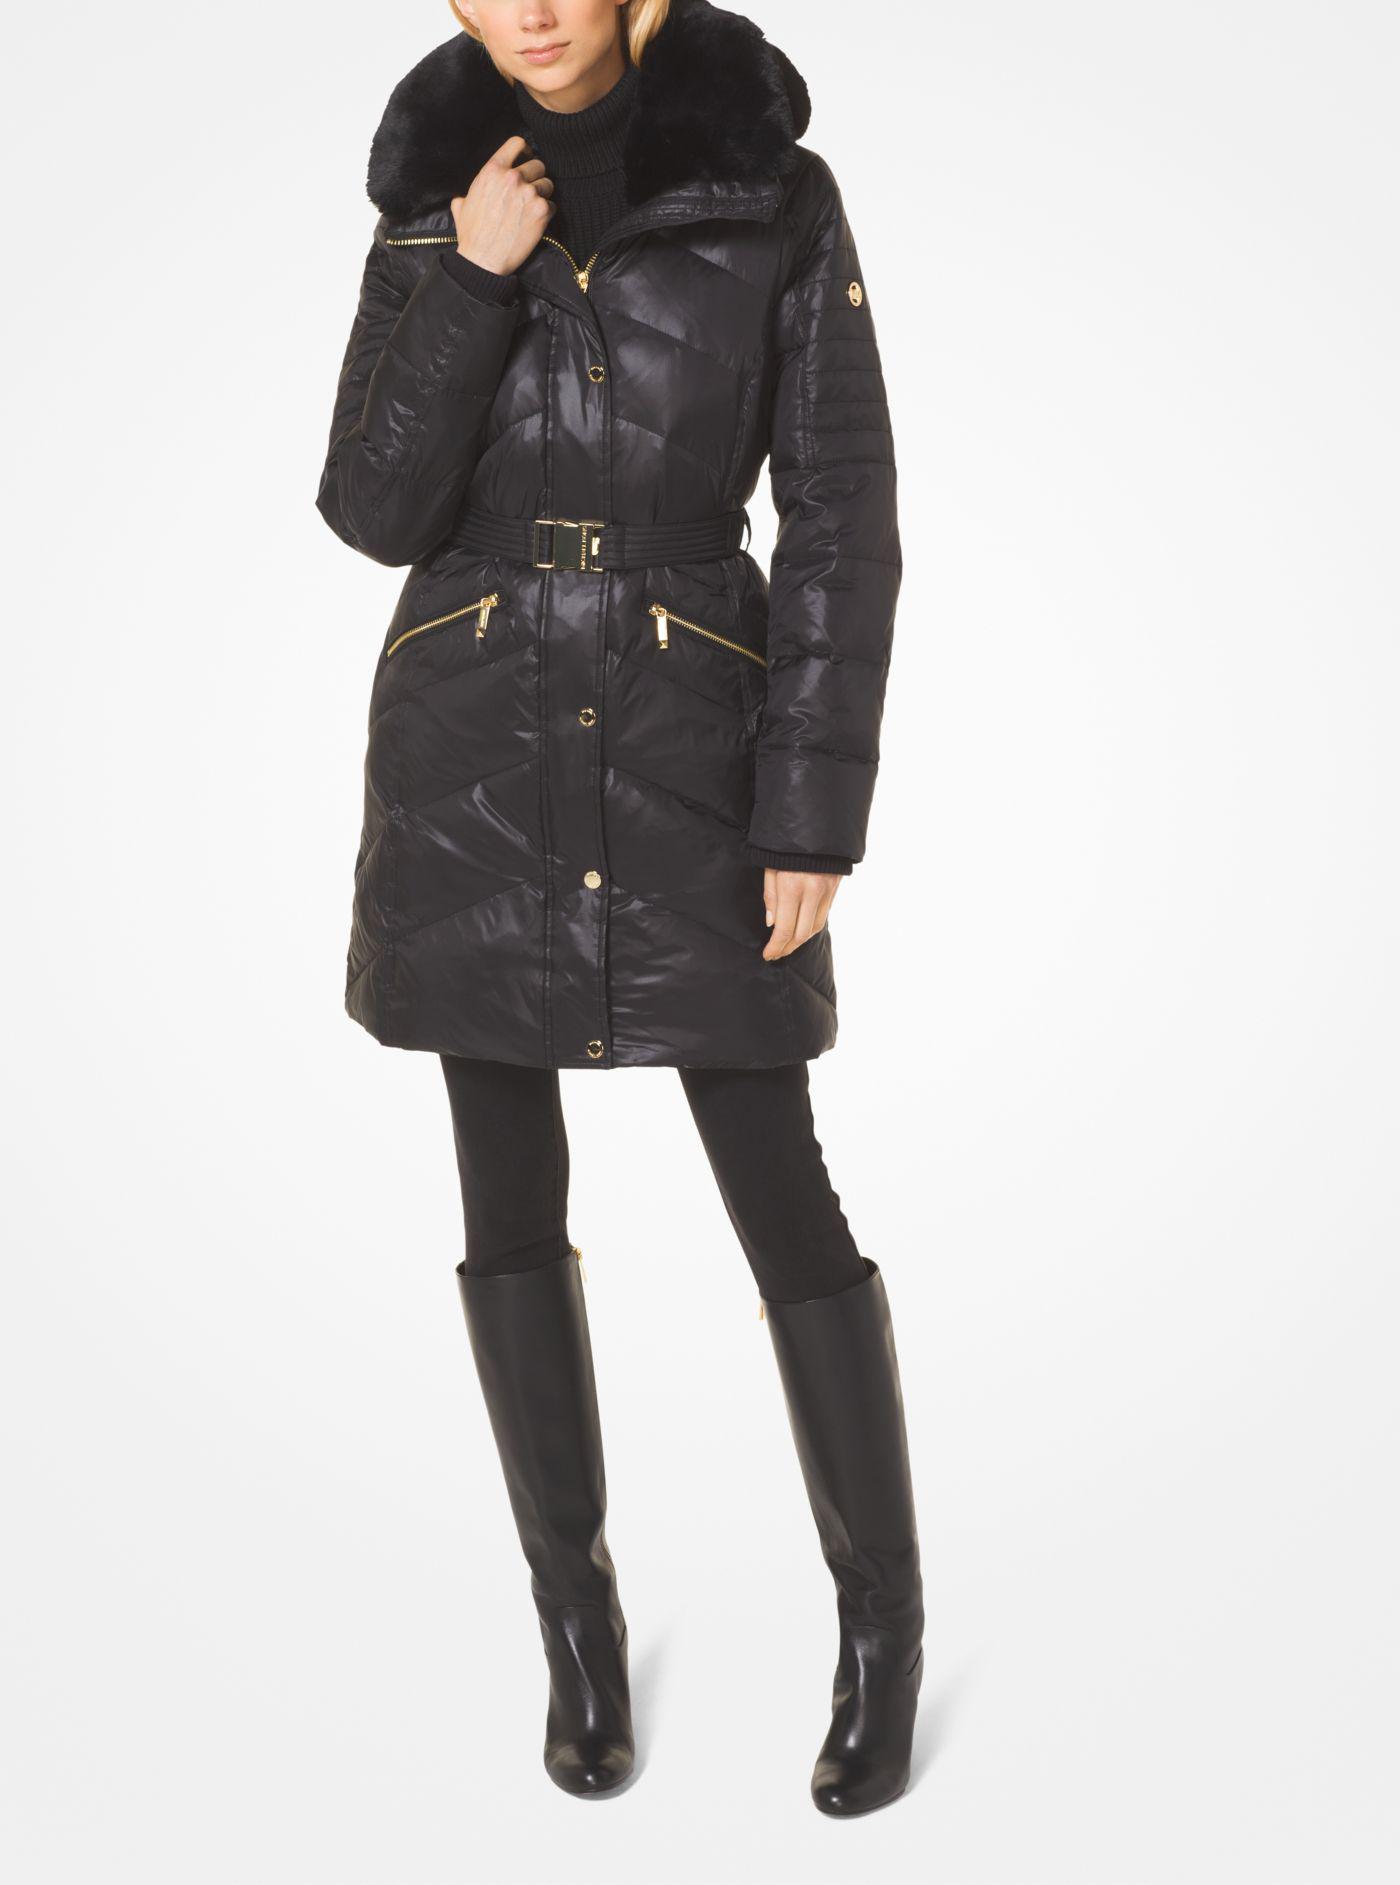 michael kors quilted nylon and faux fur puffer